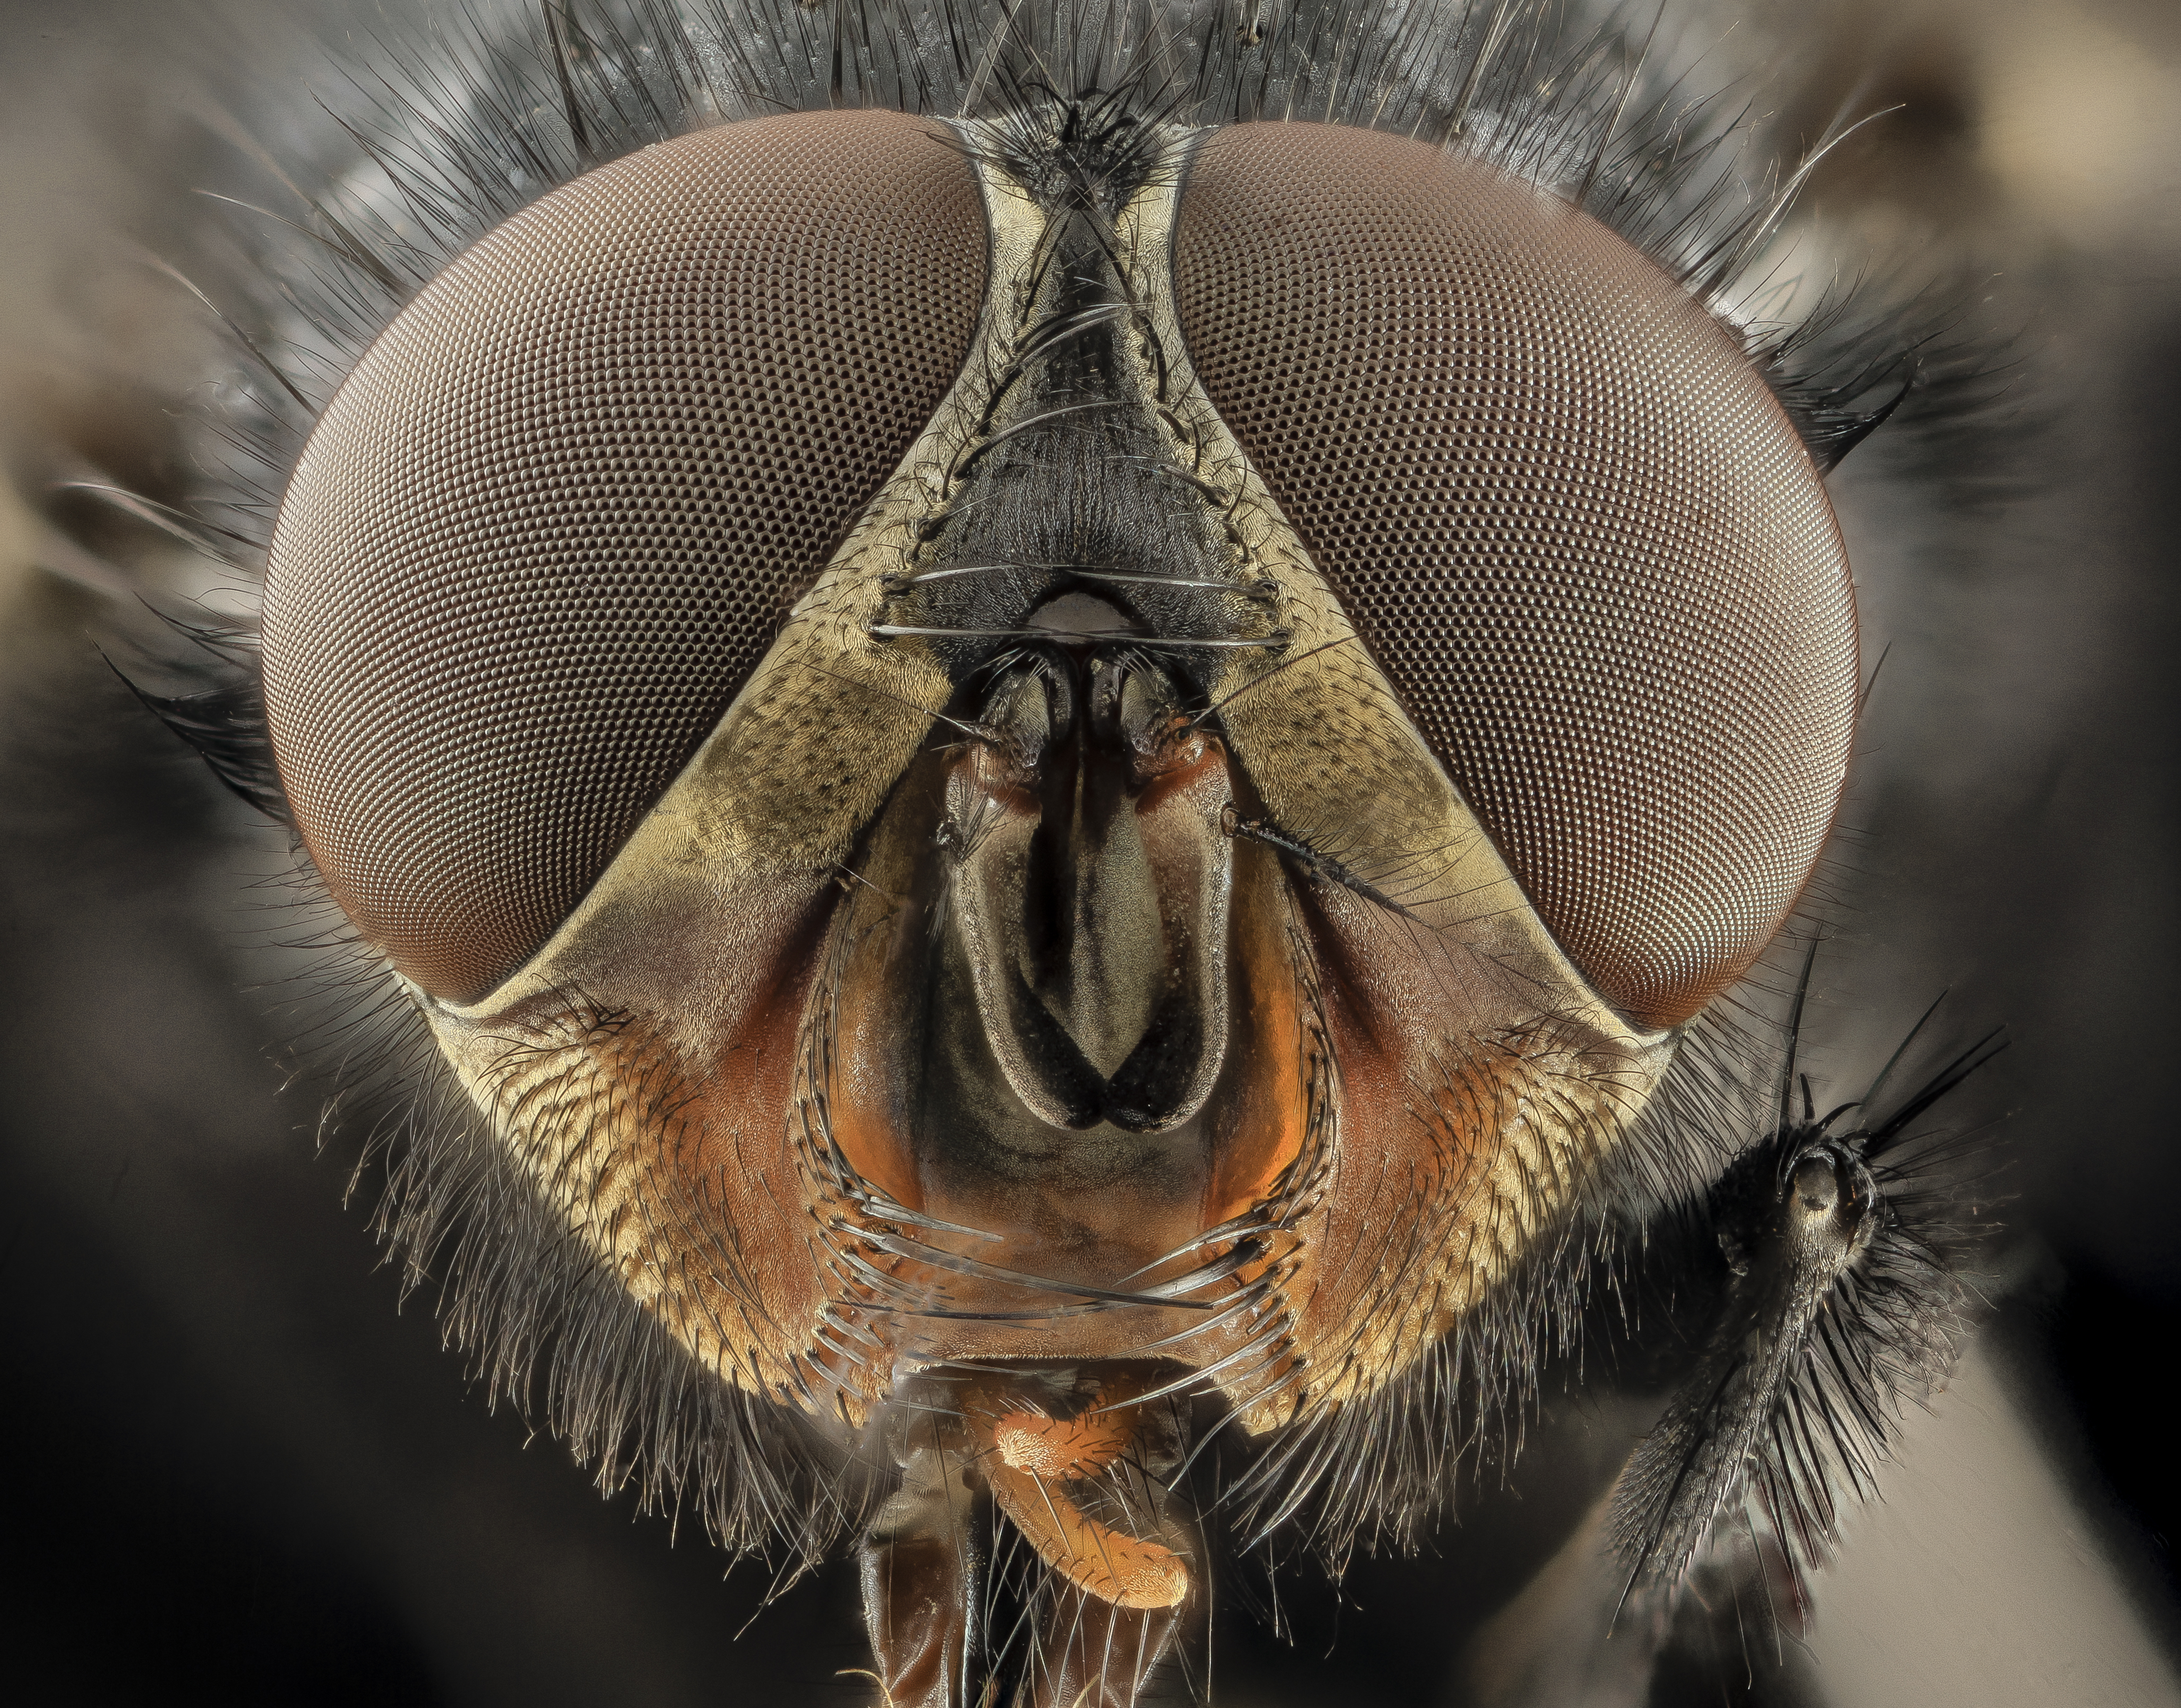 Blue bottle fly (Calliphora species) by USGS Bee Inventory and Monitoring Lab